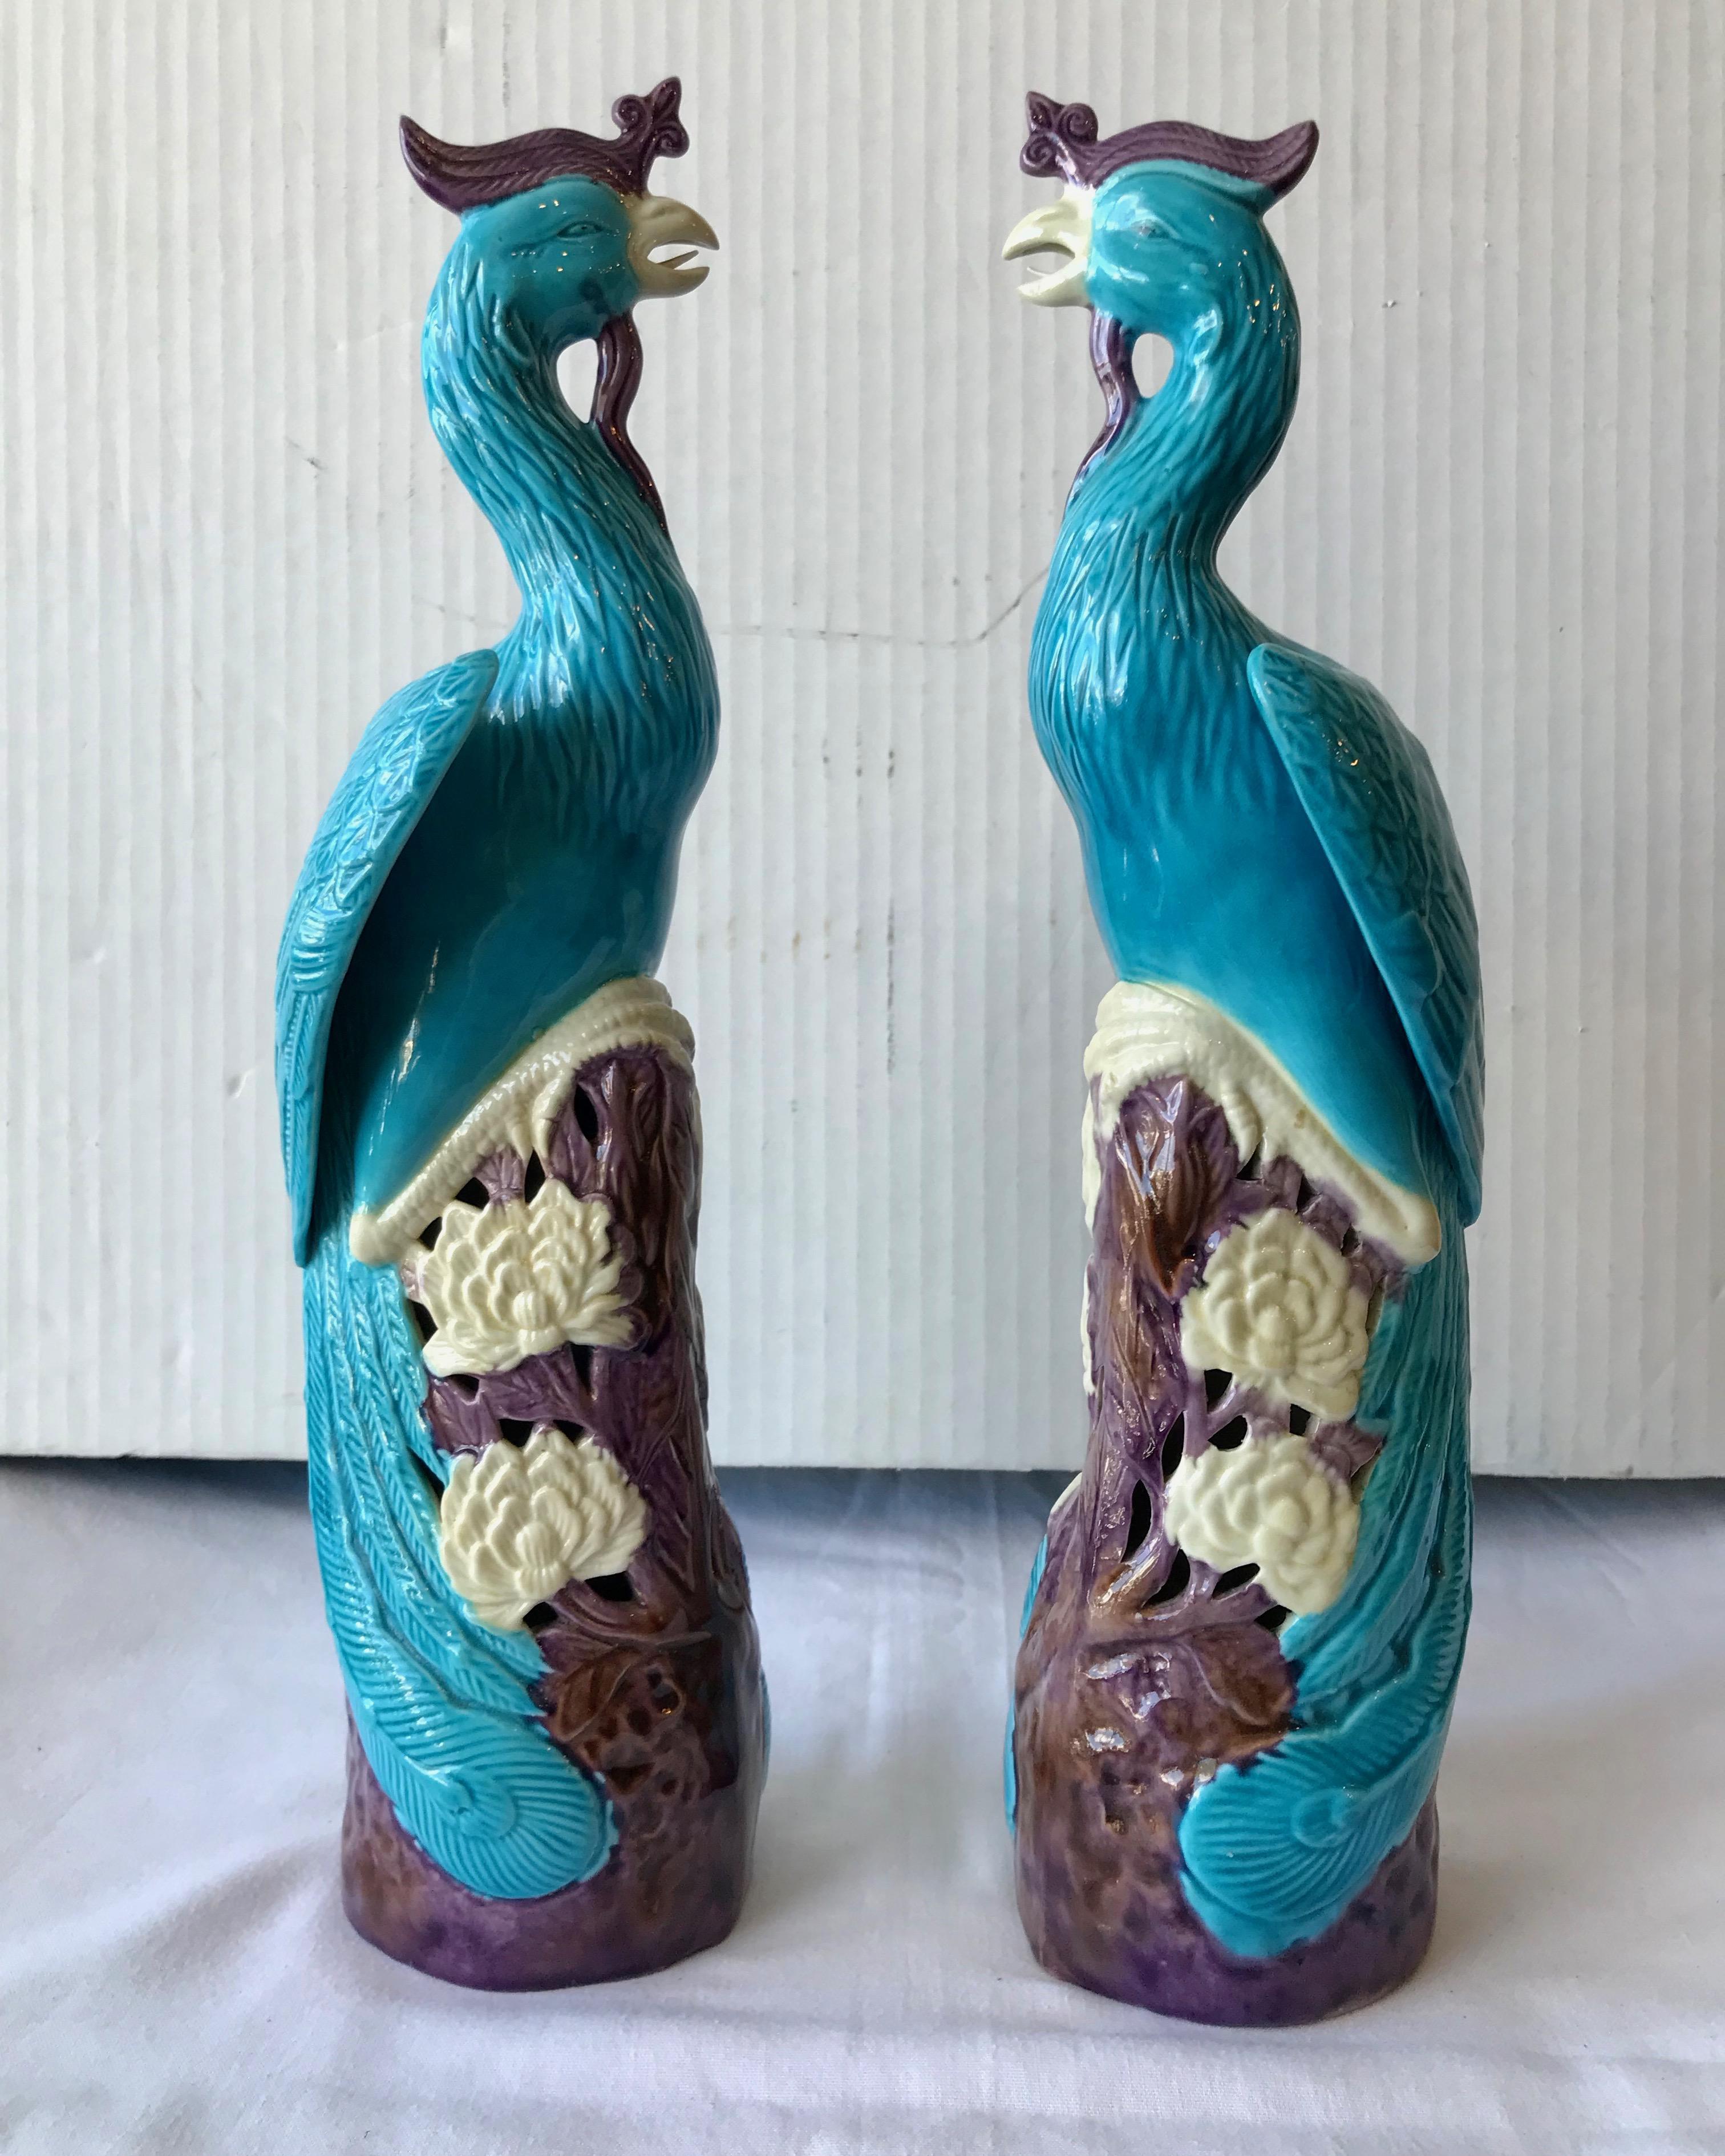 Brilliant turquoise color and fine attention to details with these eye catching
vintage birds.